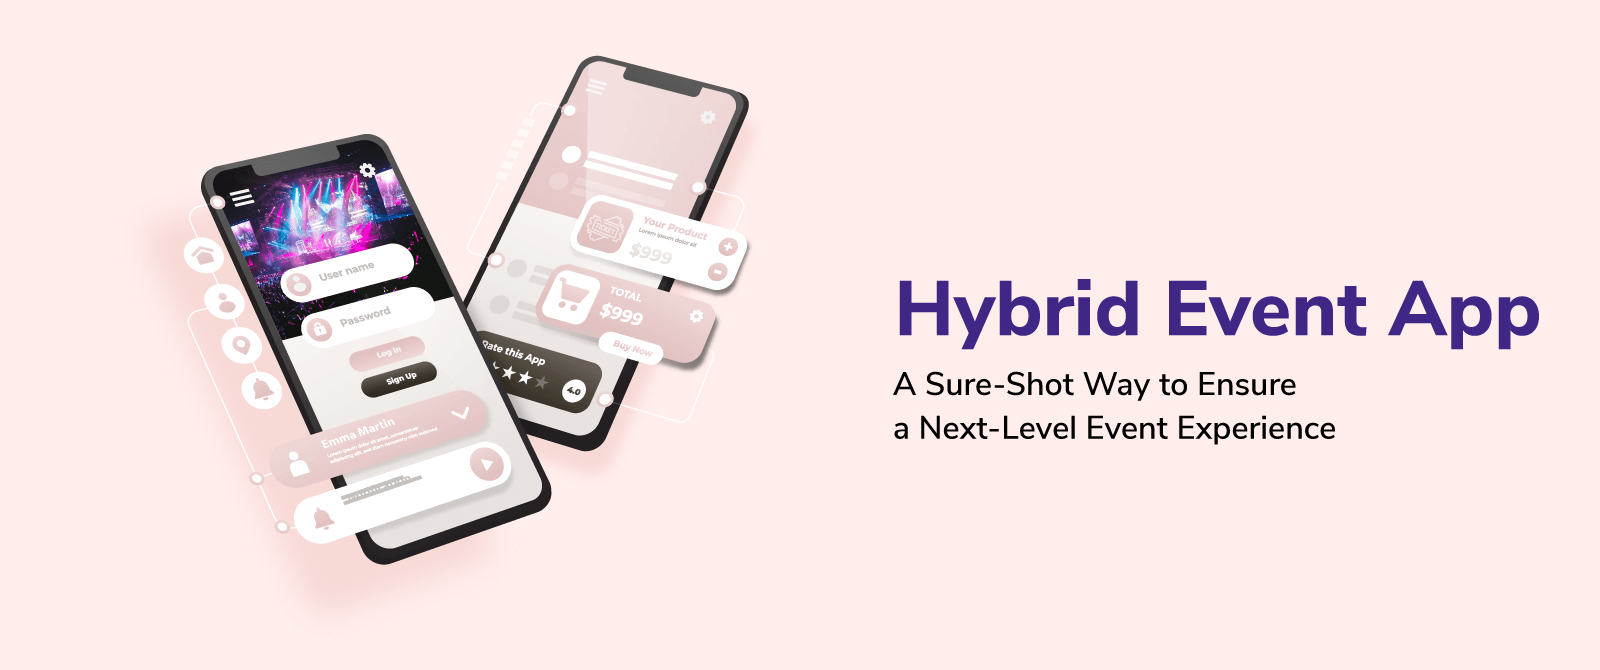 Hybrid Event App – A Sure-Shot Way to Ensure a Next-Level Event Experience